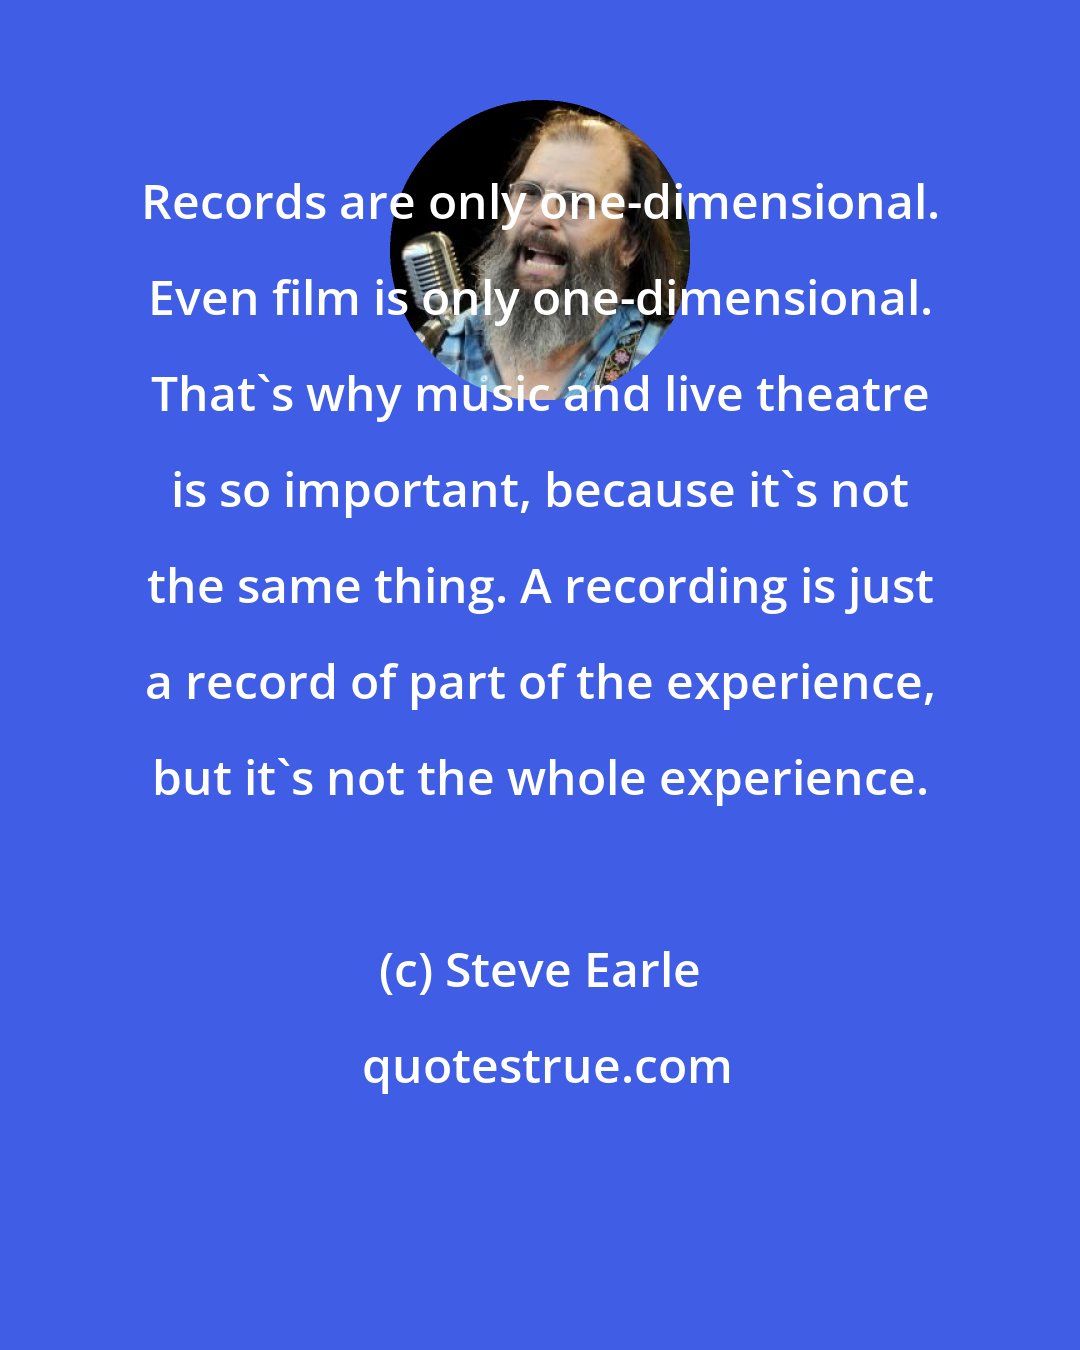 Steve Earle: Records are only one-dimensional. Even film is only one-dimensional. That's why music and live theatre is so important, because it's not the same thing. A recording is just a record of part of the experience, but it's not the whole experience.